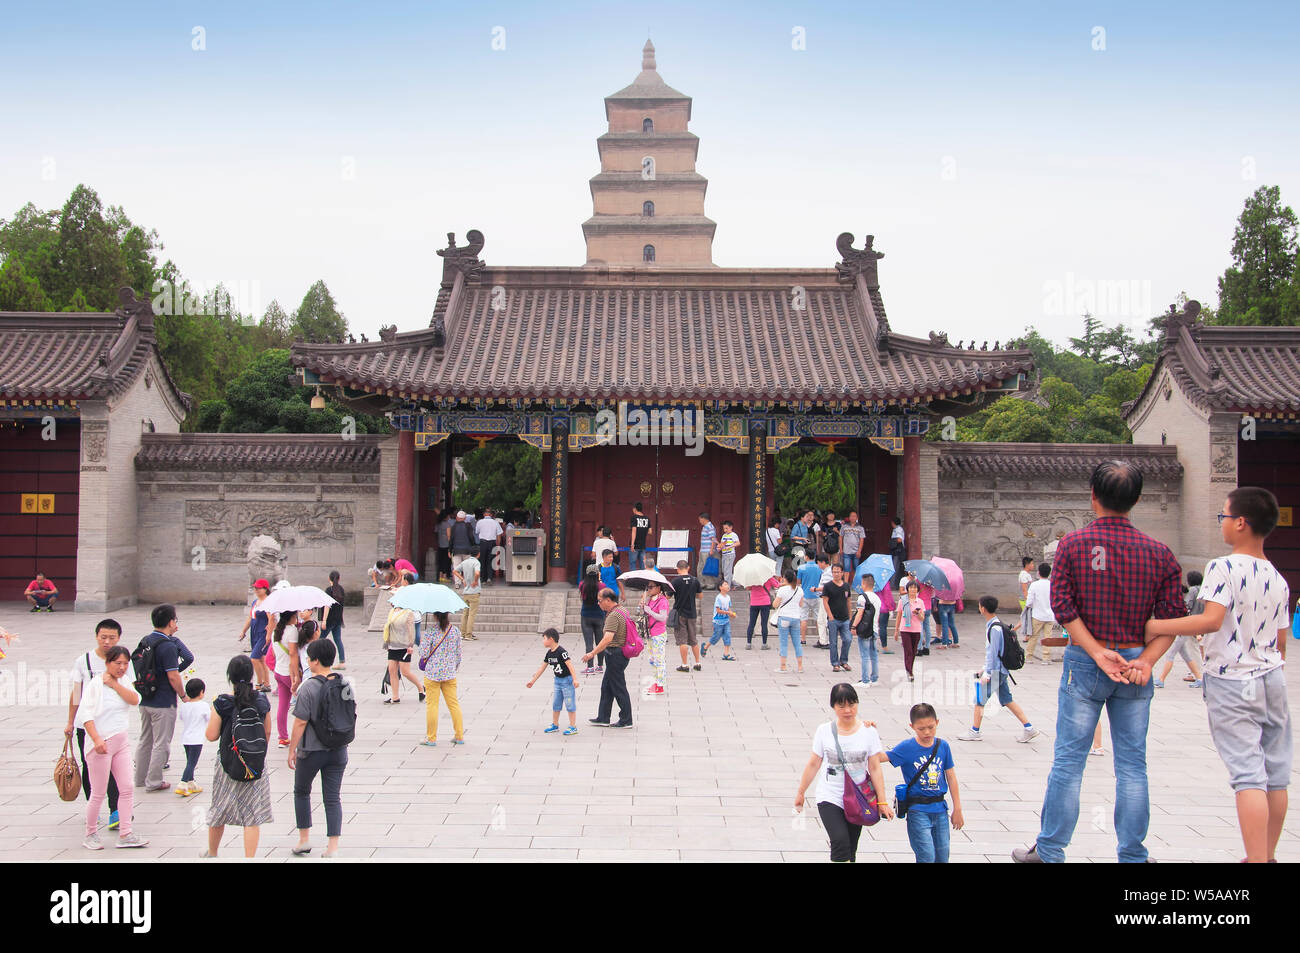 August 19, 2015. Xian, China.  Crowds of people outside the giant wild goose pagoda or Dayan Pagoda locaed at Da Cien Temple complex in Xian China on Stock Photo